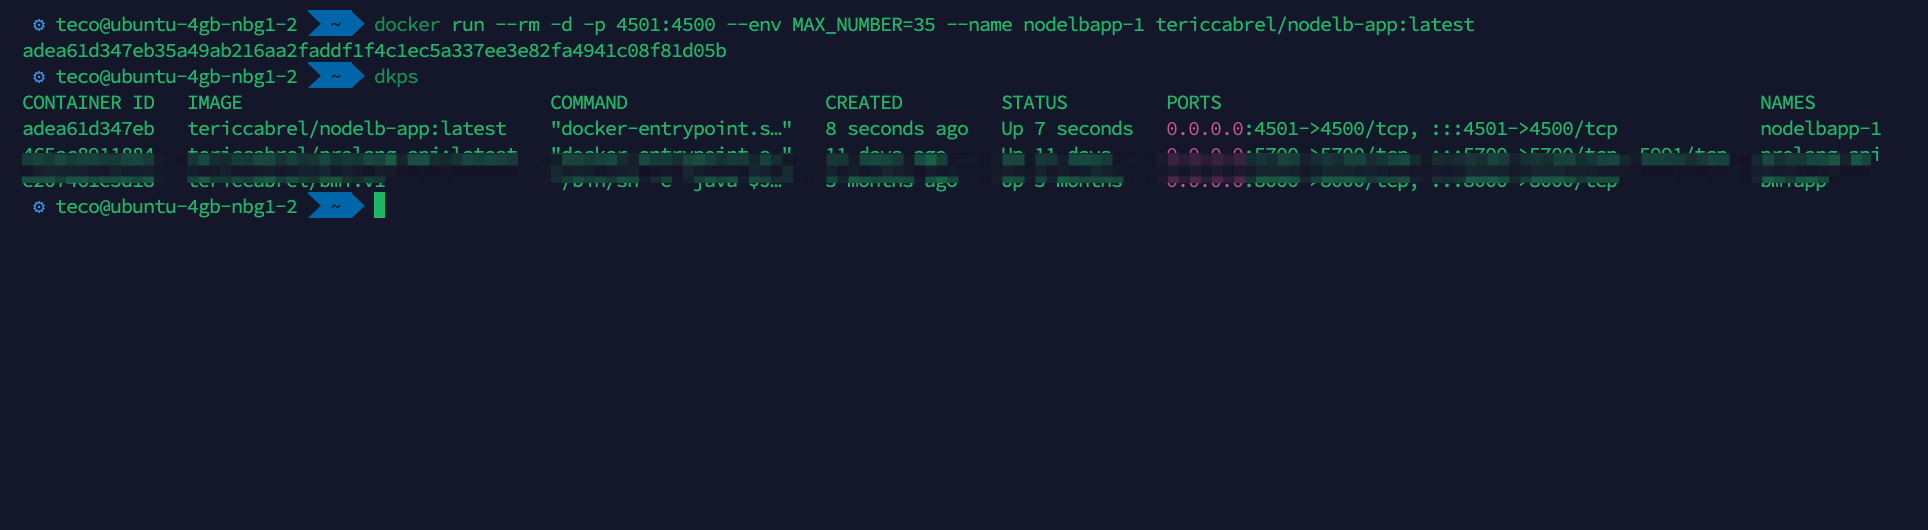 View the Docker container of the Node.js application.